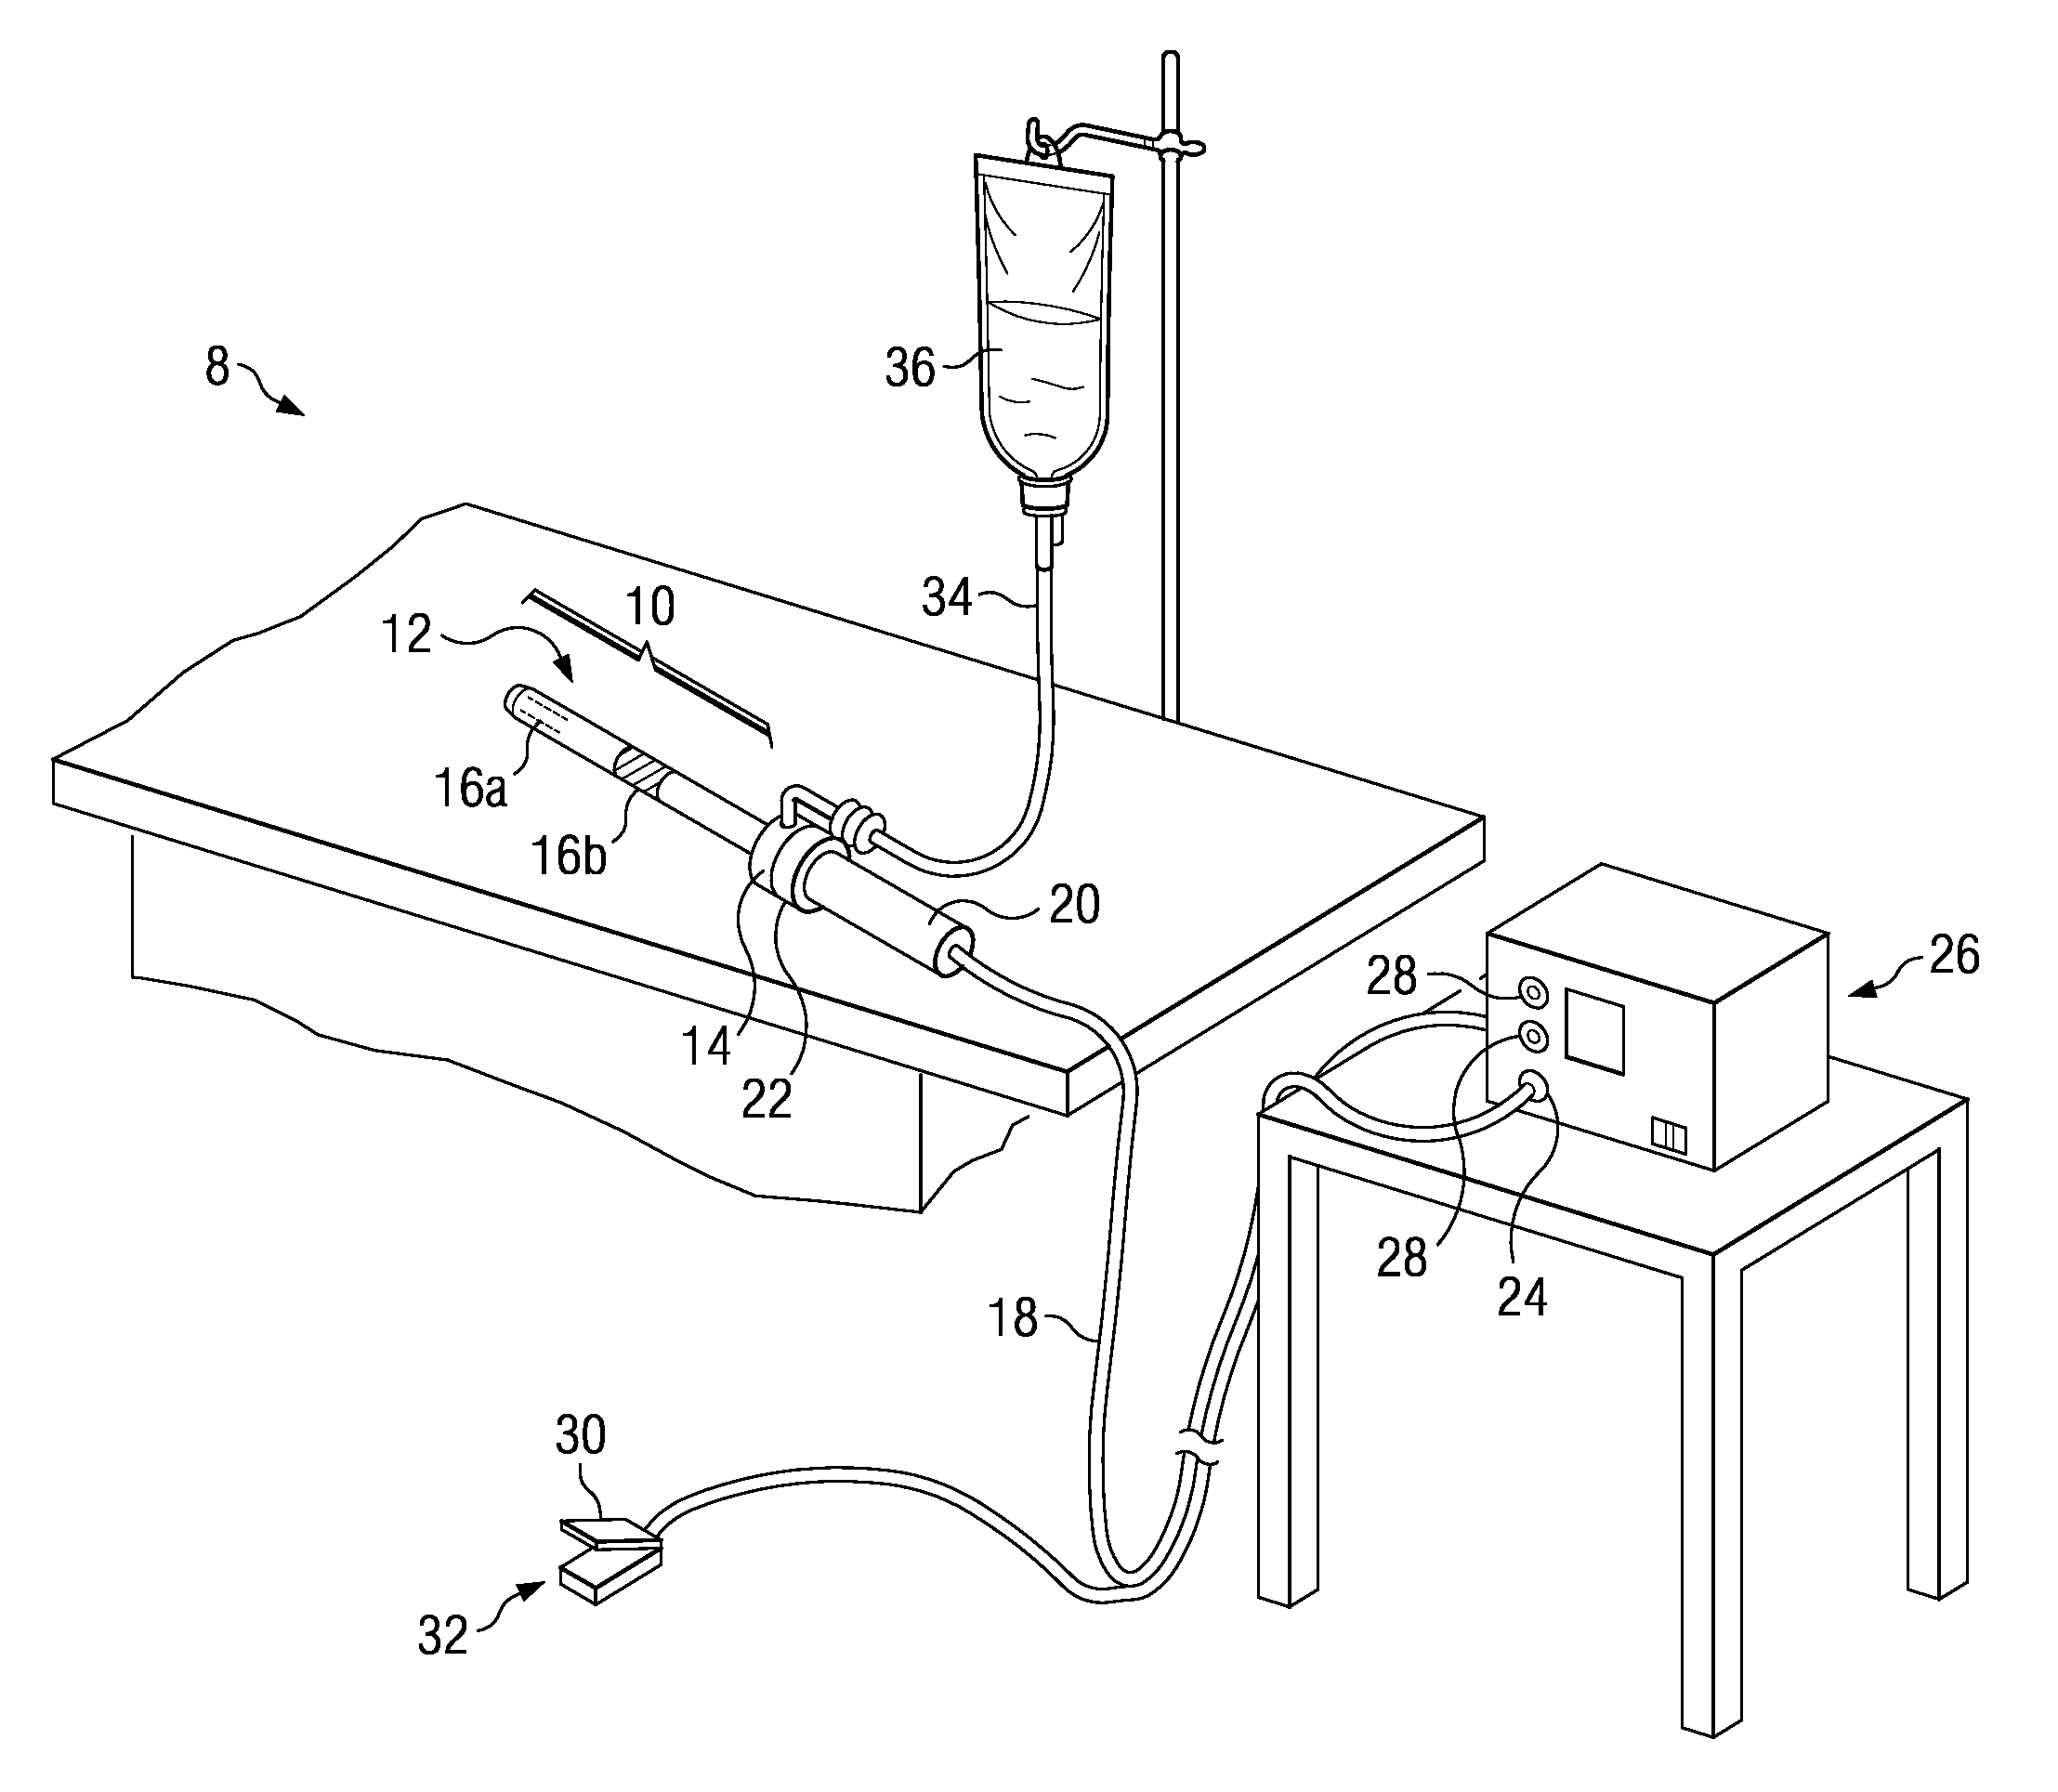 Electrosurgical system and method for treating chronic wound tissue